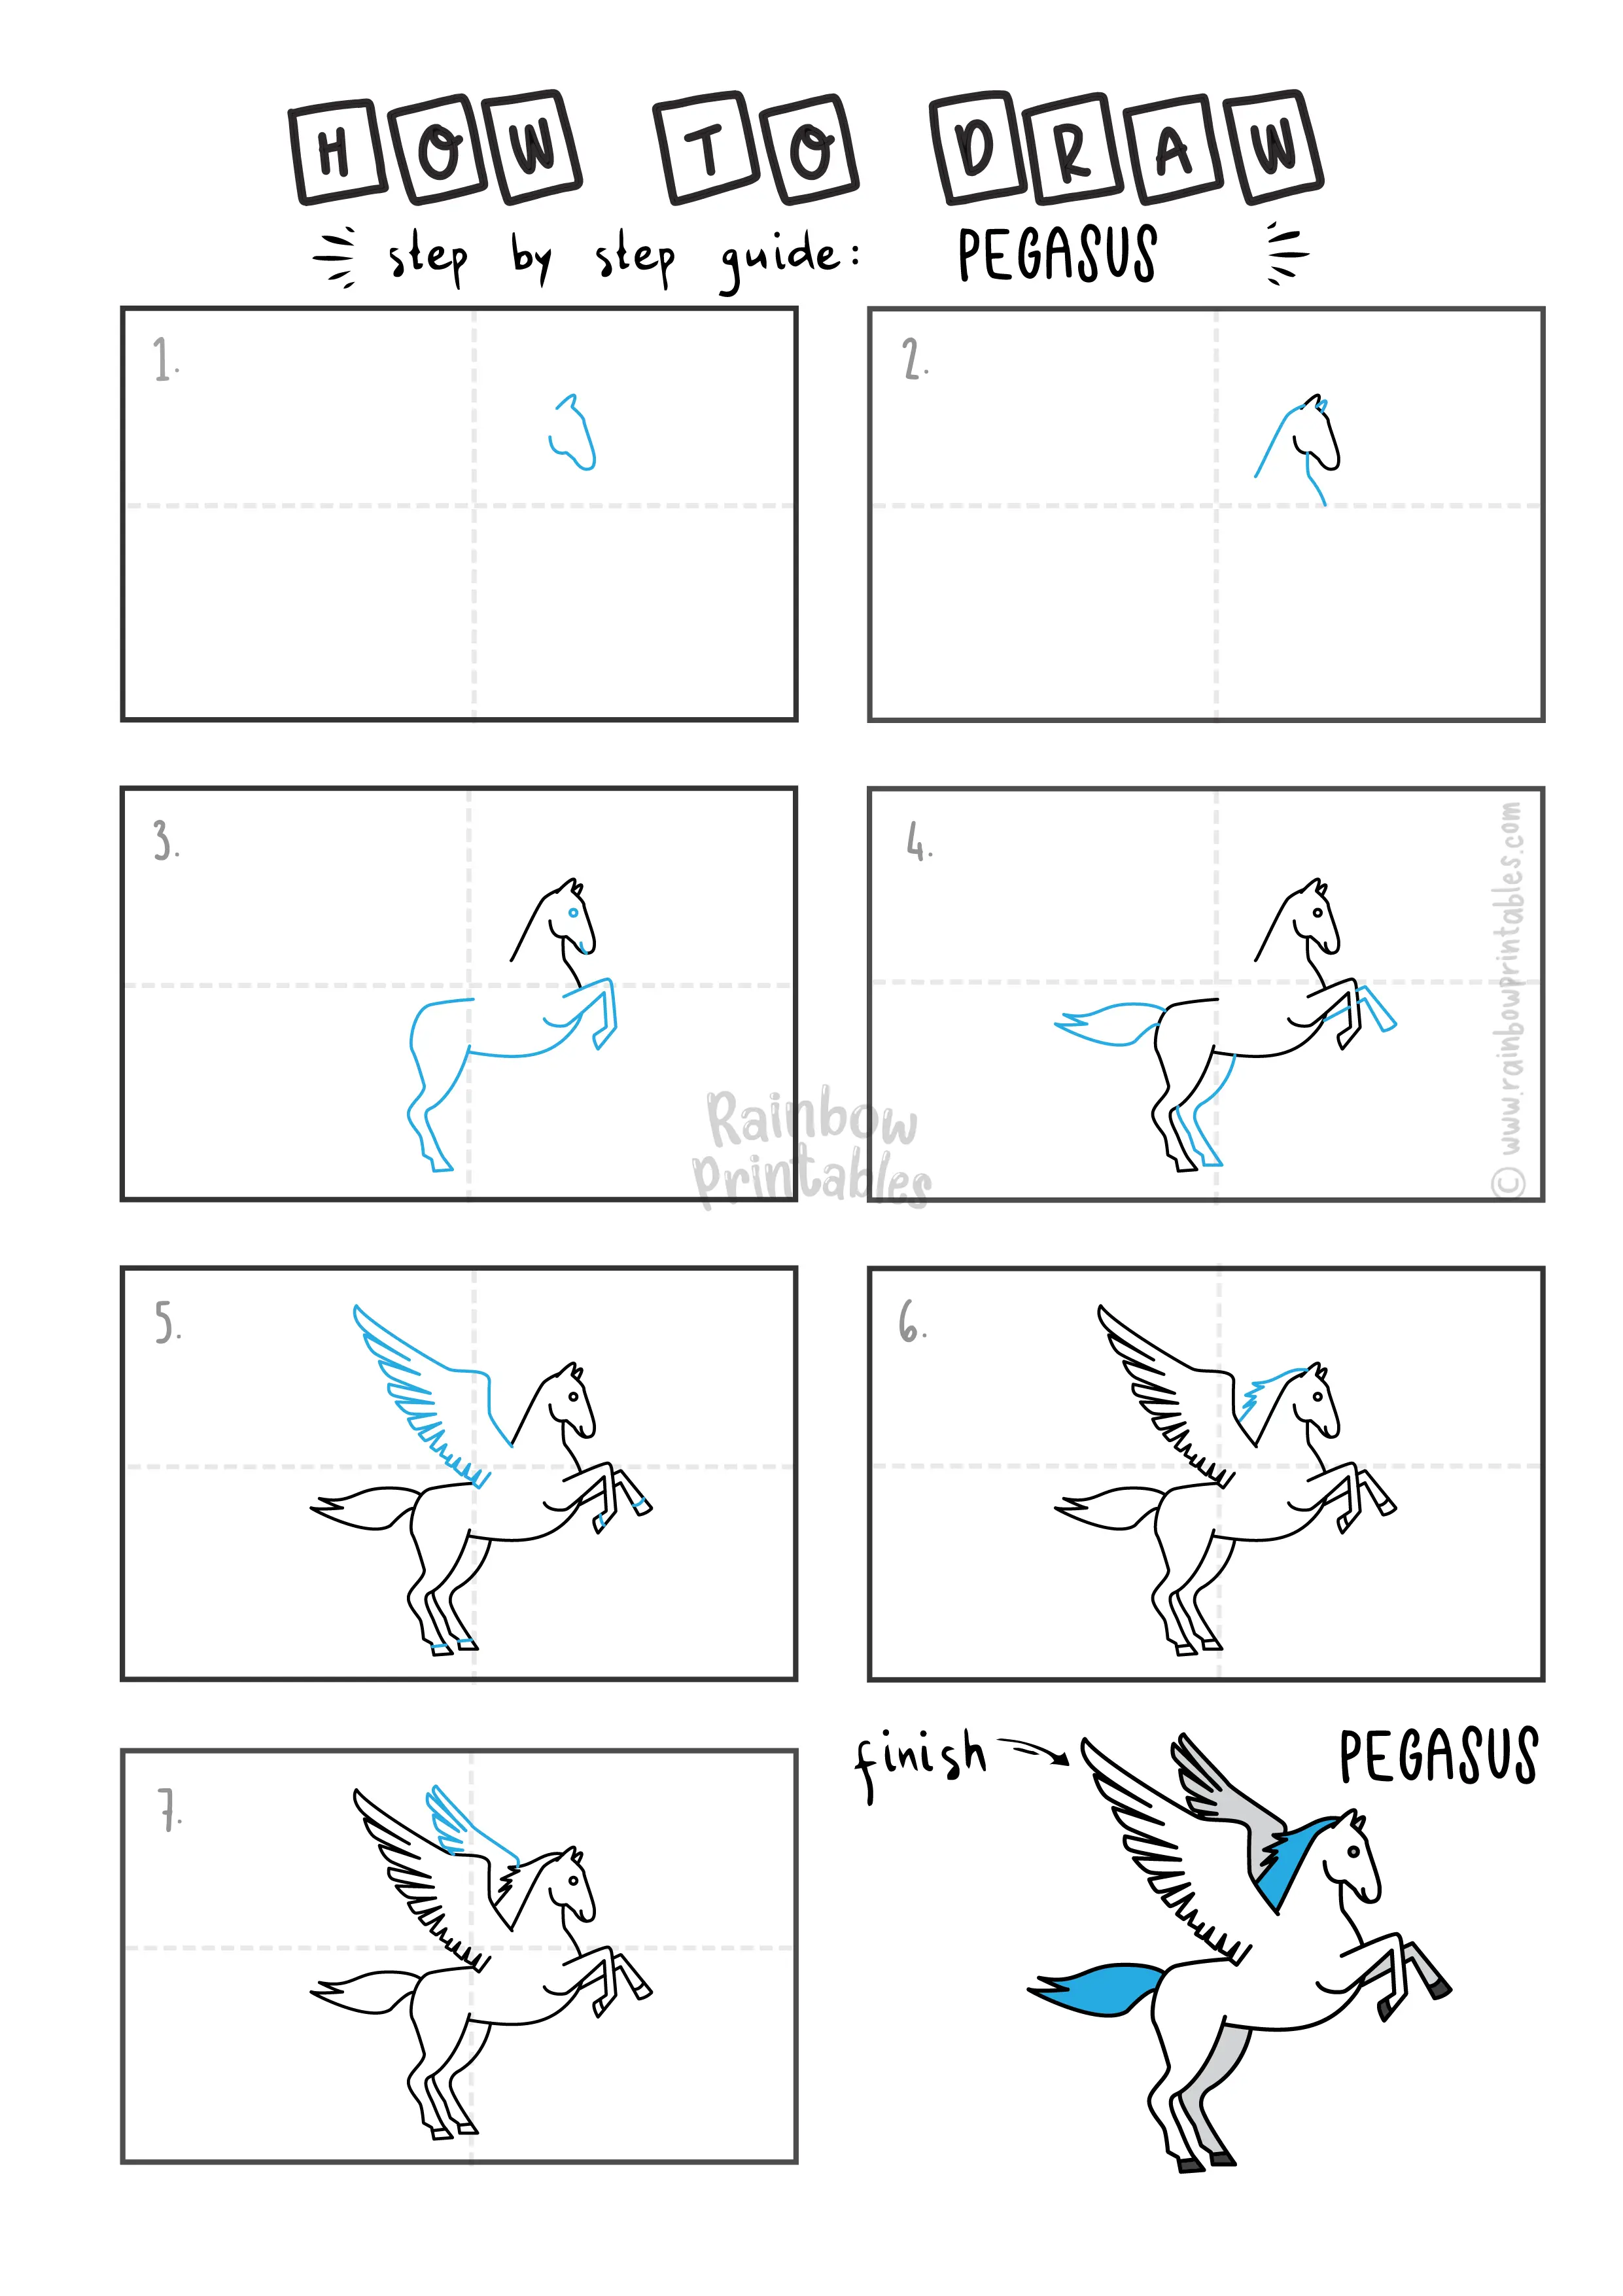 How To Draw a PEGASUS FLYING HORSE MYTH LEGEND FANTASY Step By Step Easy Simple Drawing Guide for Kids